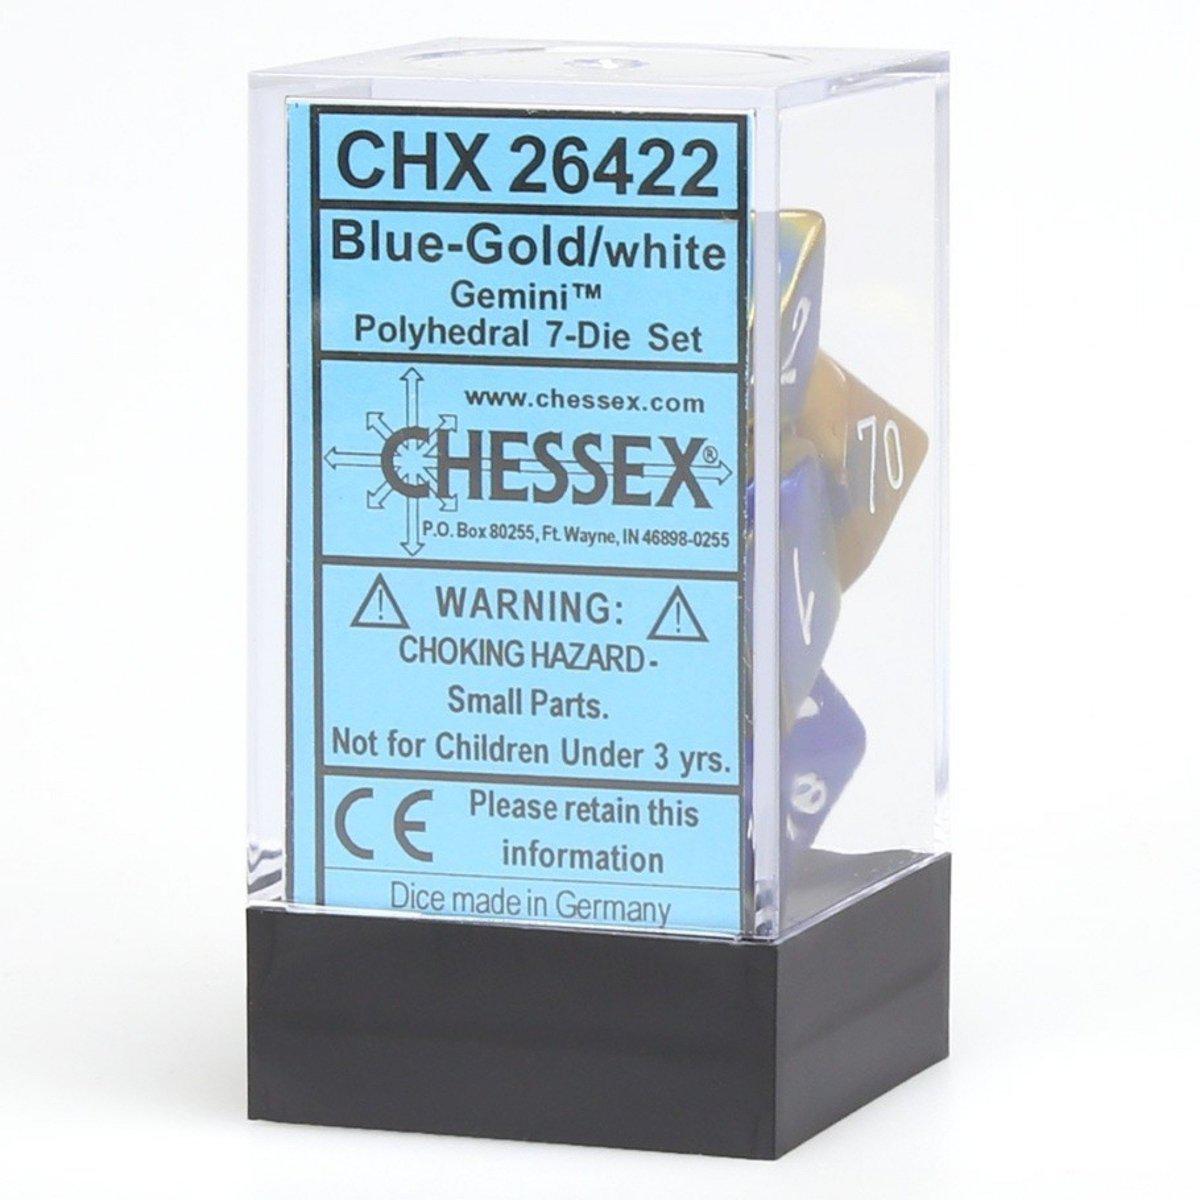 Chessex Gemini™ Polyhedral 7pcs Dice (Blue-Gold/White) [CHX26422]-Chessex-Ace Cards & Collectibles